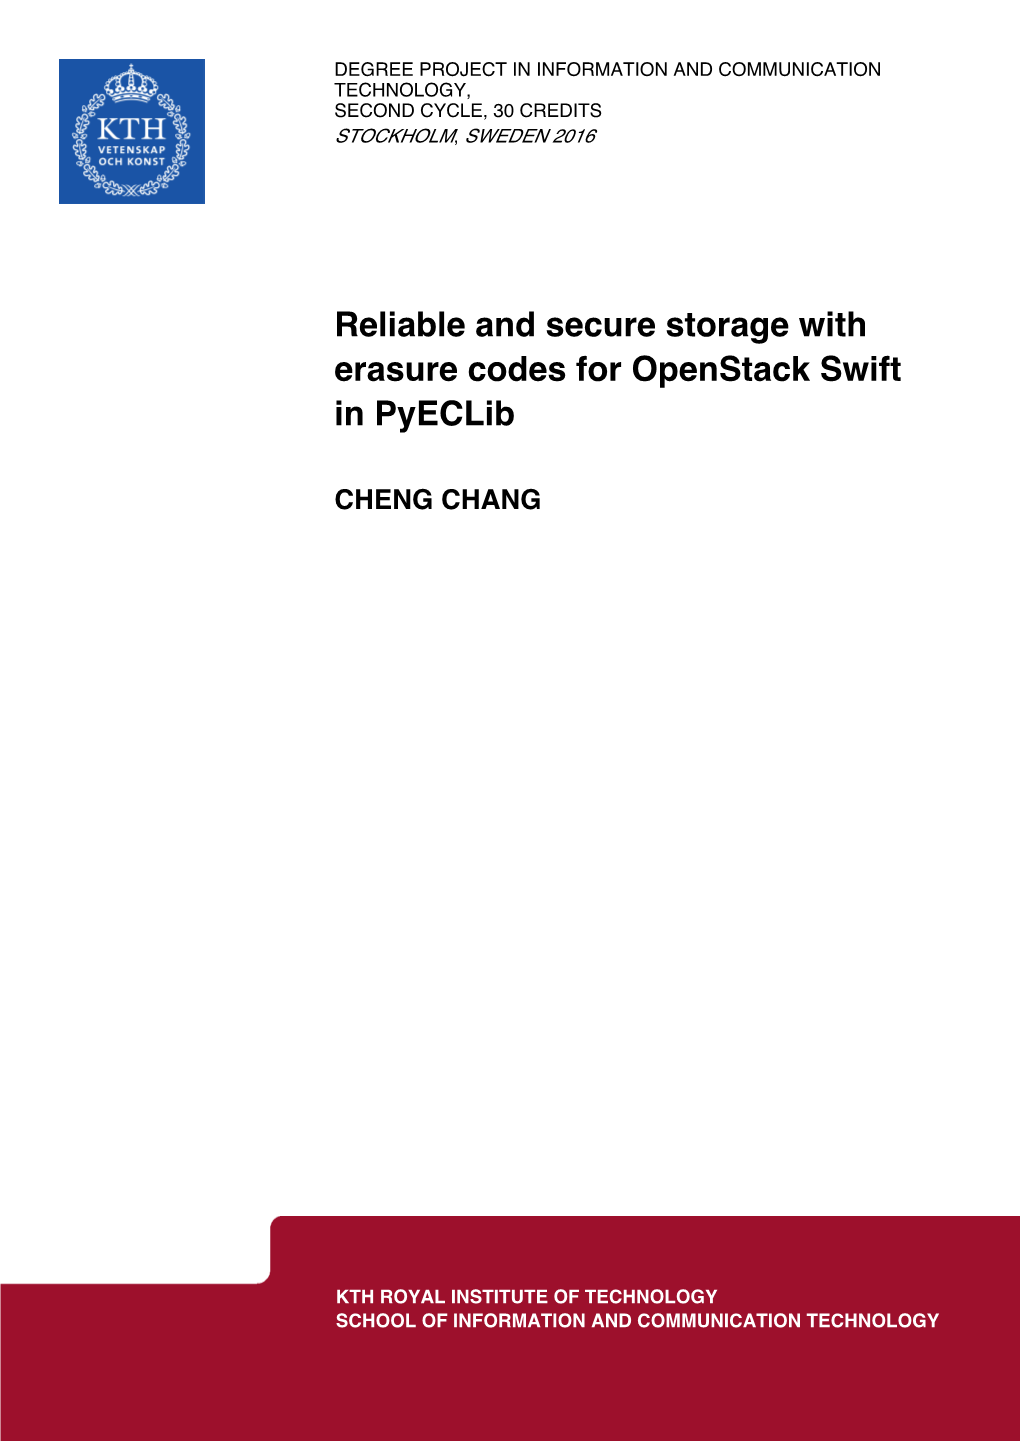 Reliable and Secure Storage with Erasure Codes for Openstack Swift in Pyeclib